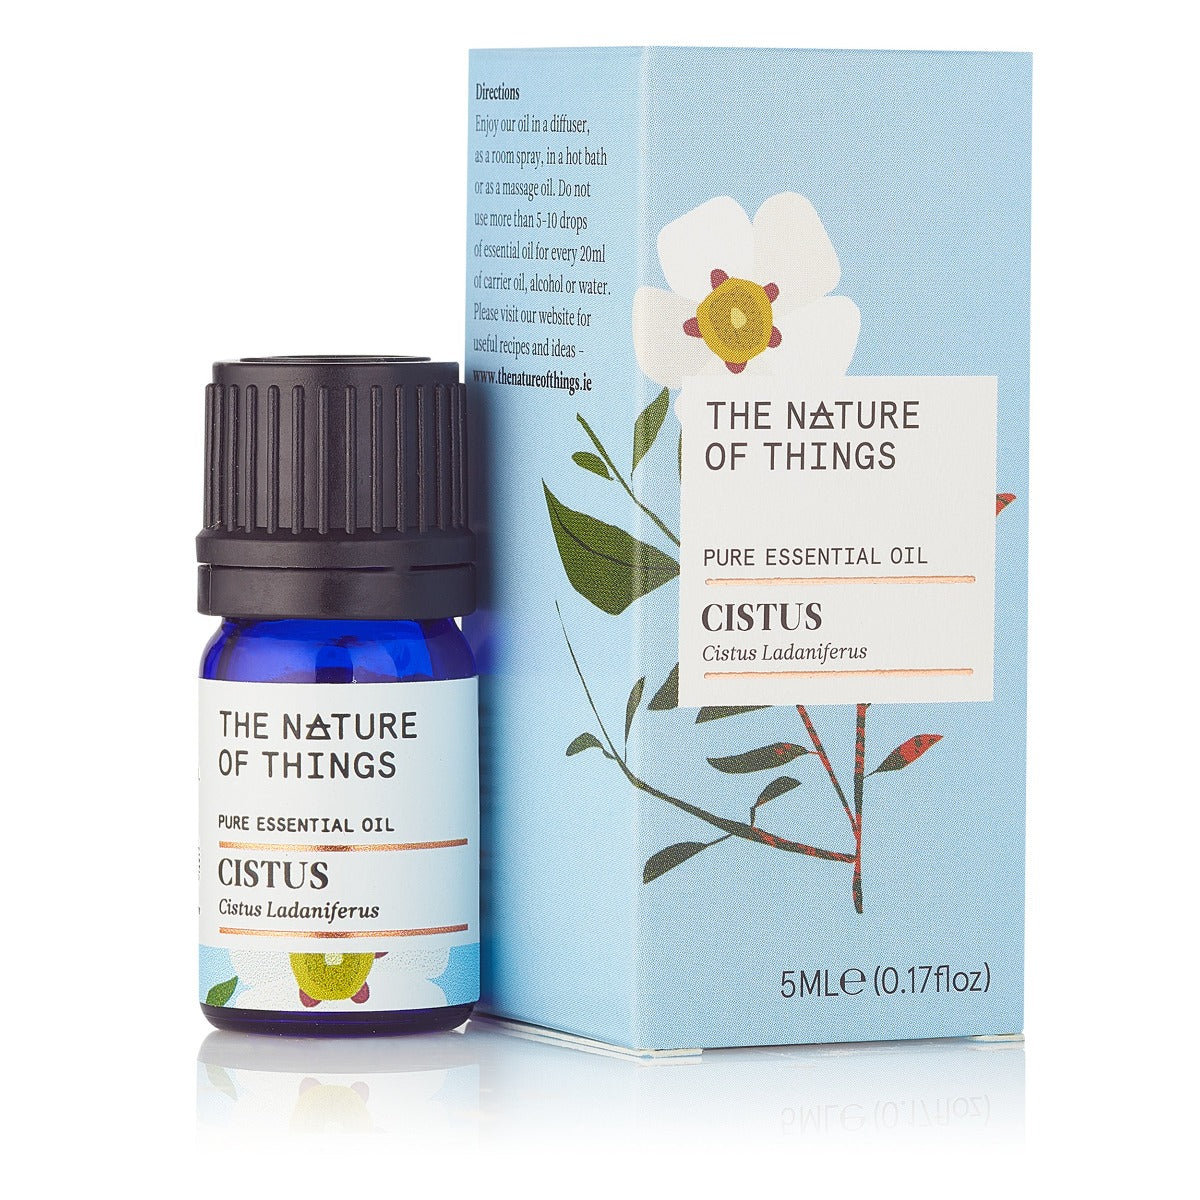 Organic Cistus Essential Oil from The Nature of Things